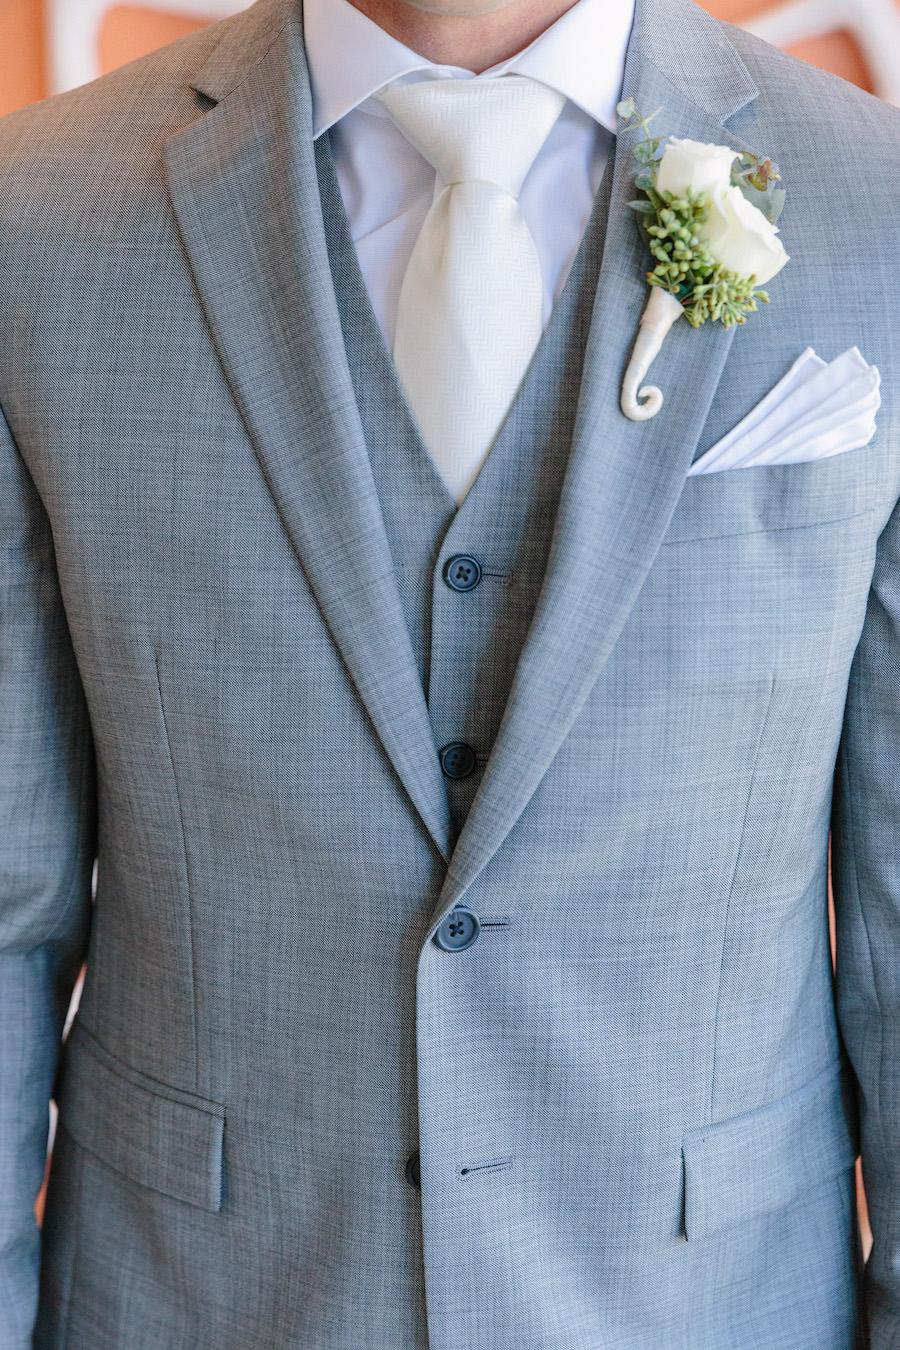 Groom Wedding Portrait in Light Grey Suit and Ivory Tie with Ivory Floral Boutonniere